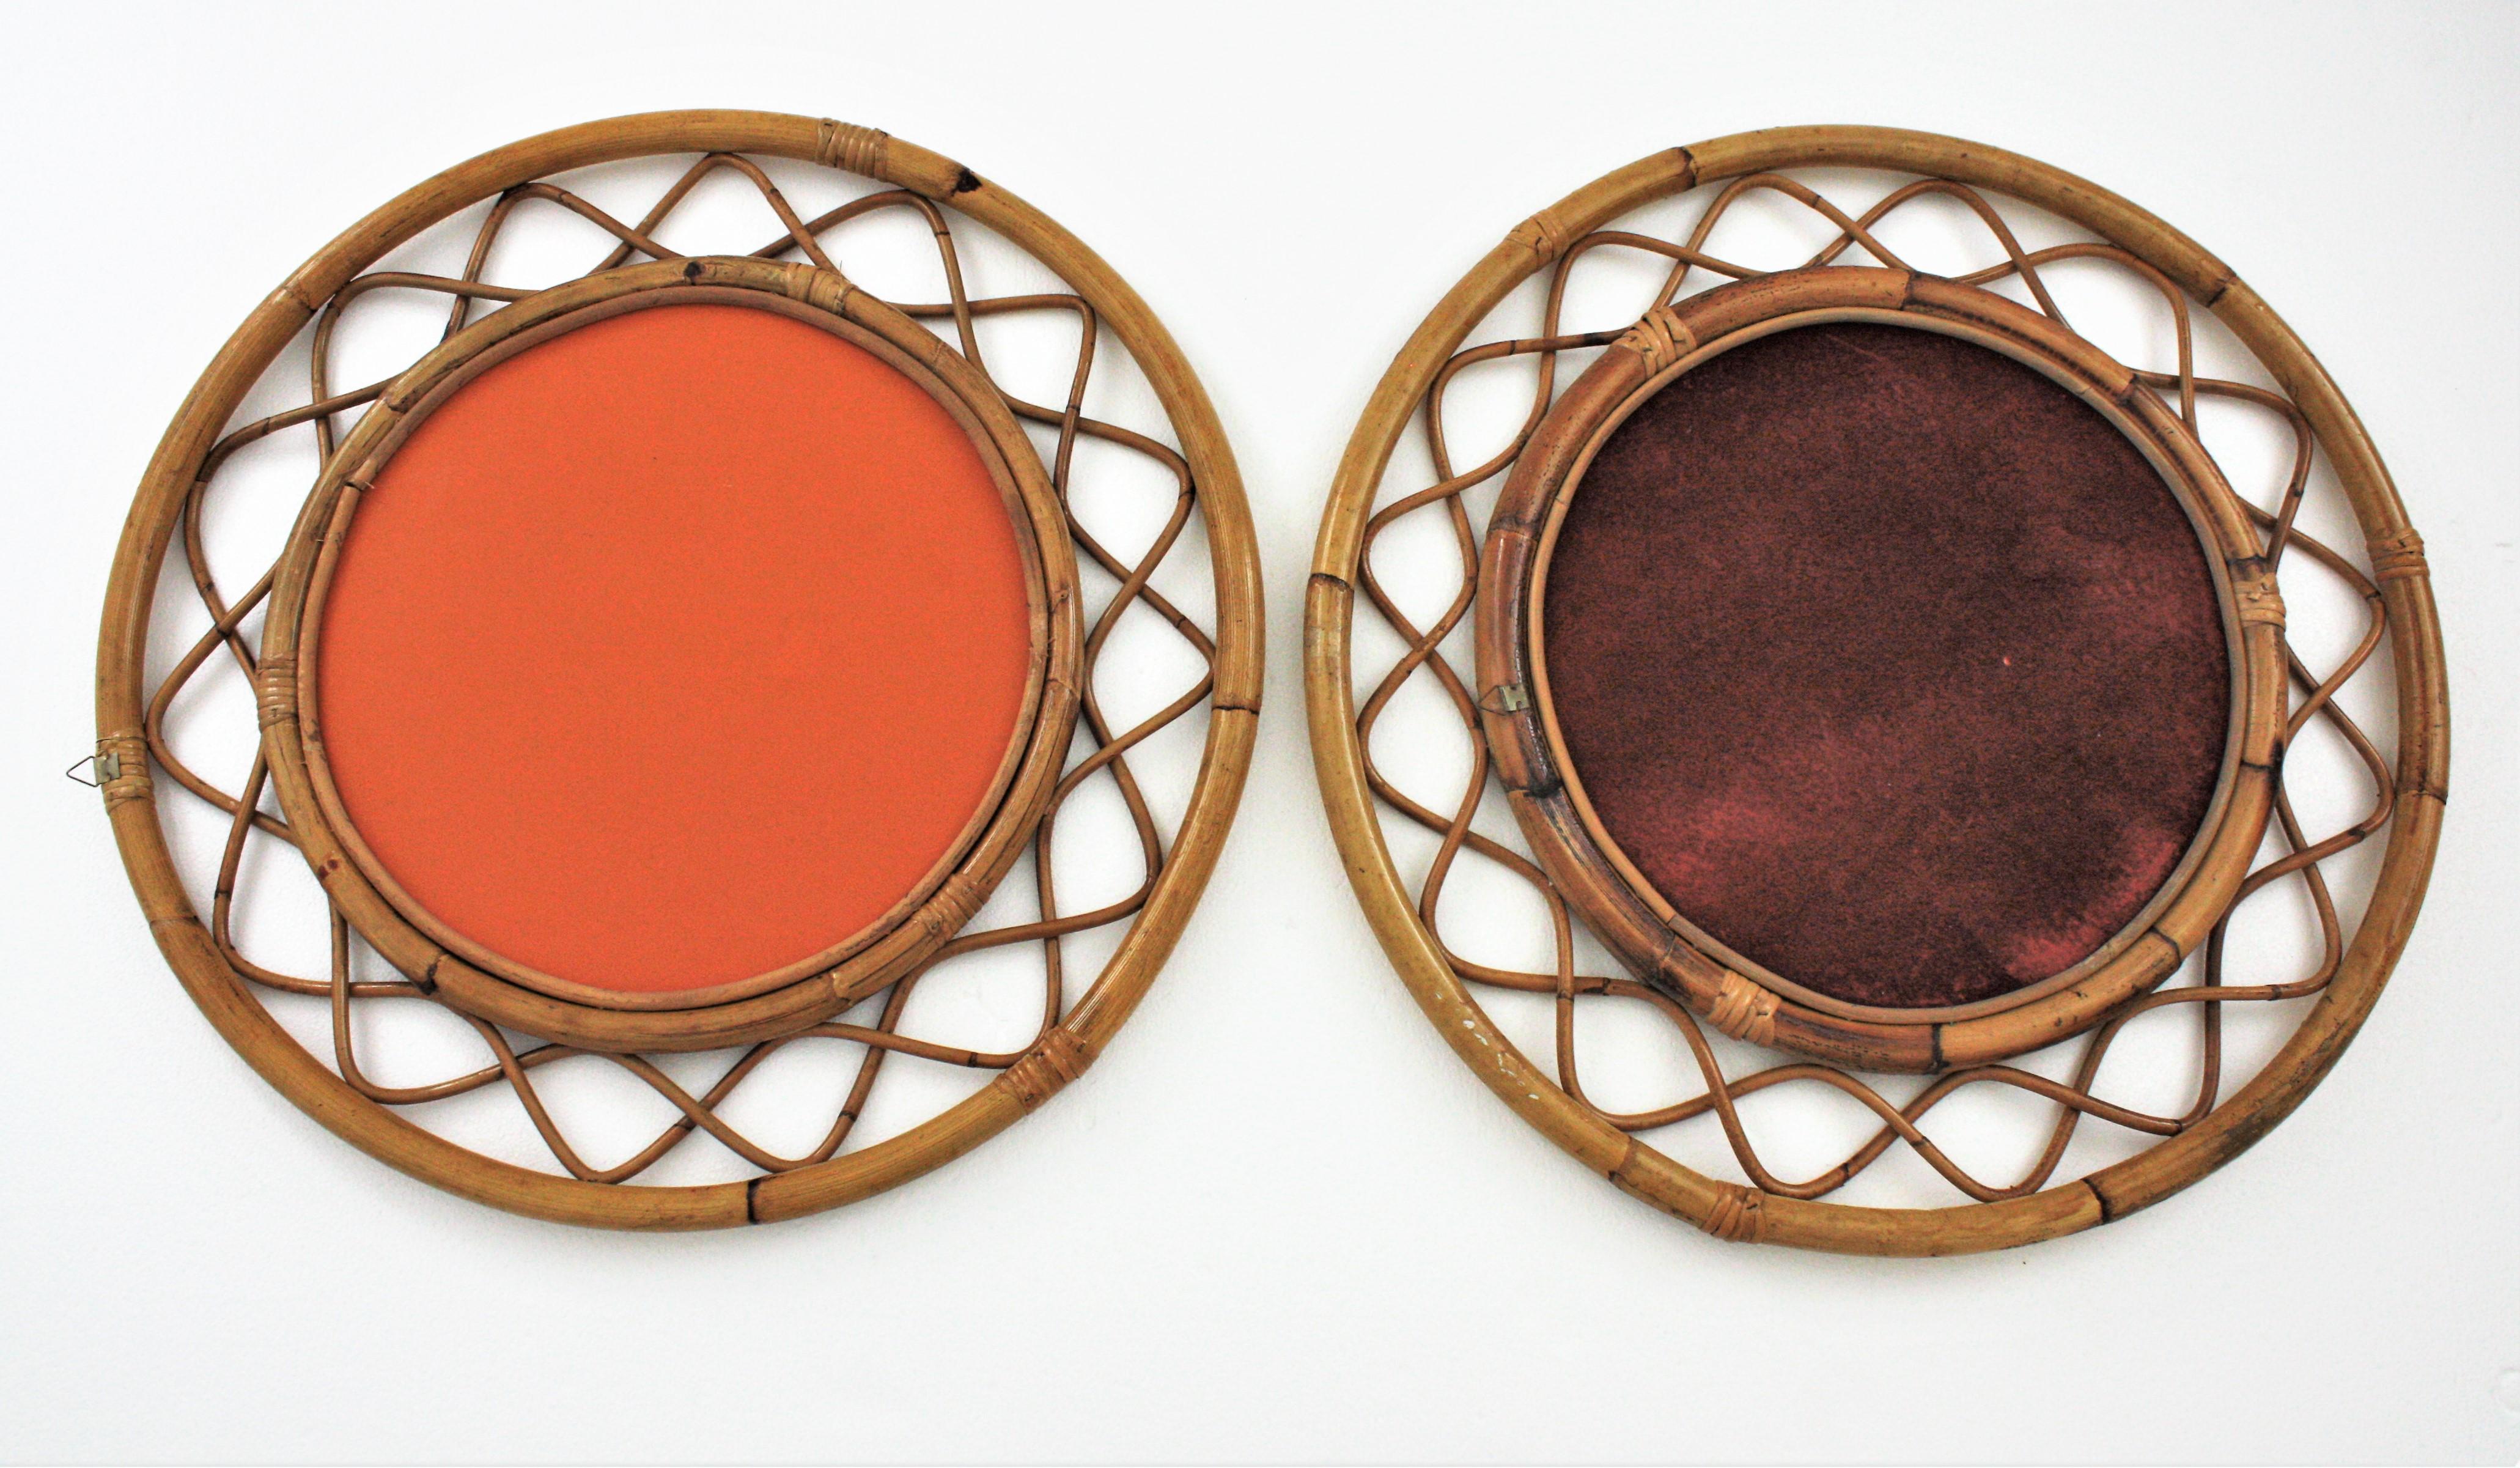 Pair of Rattan Bamboo Round Mirrors, Franco Albini Style For Sale 3